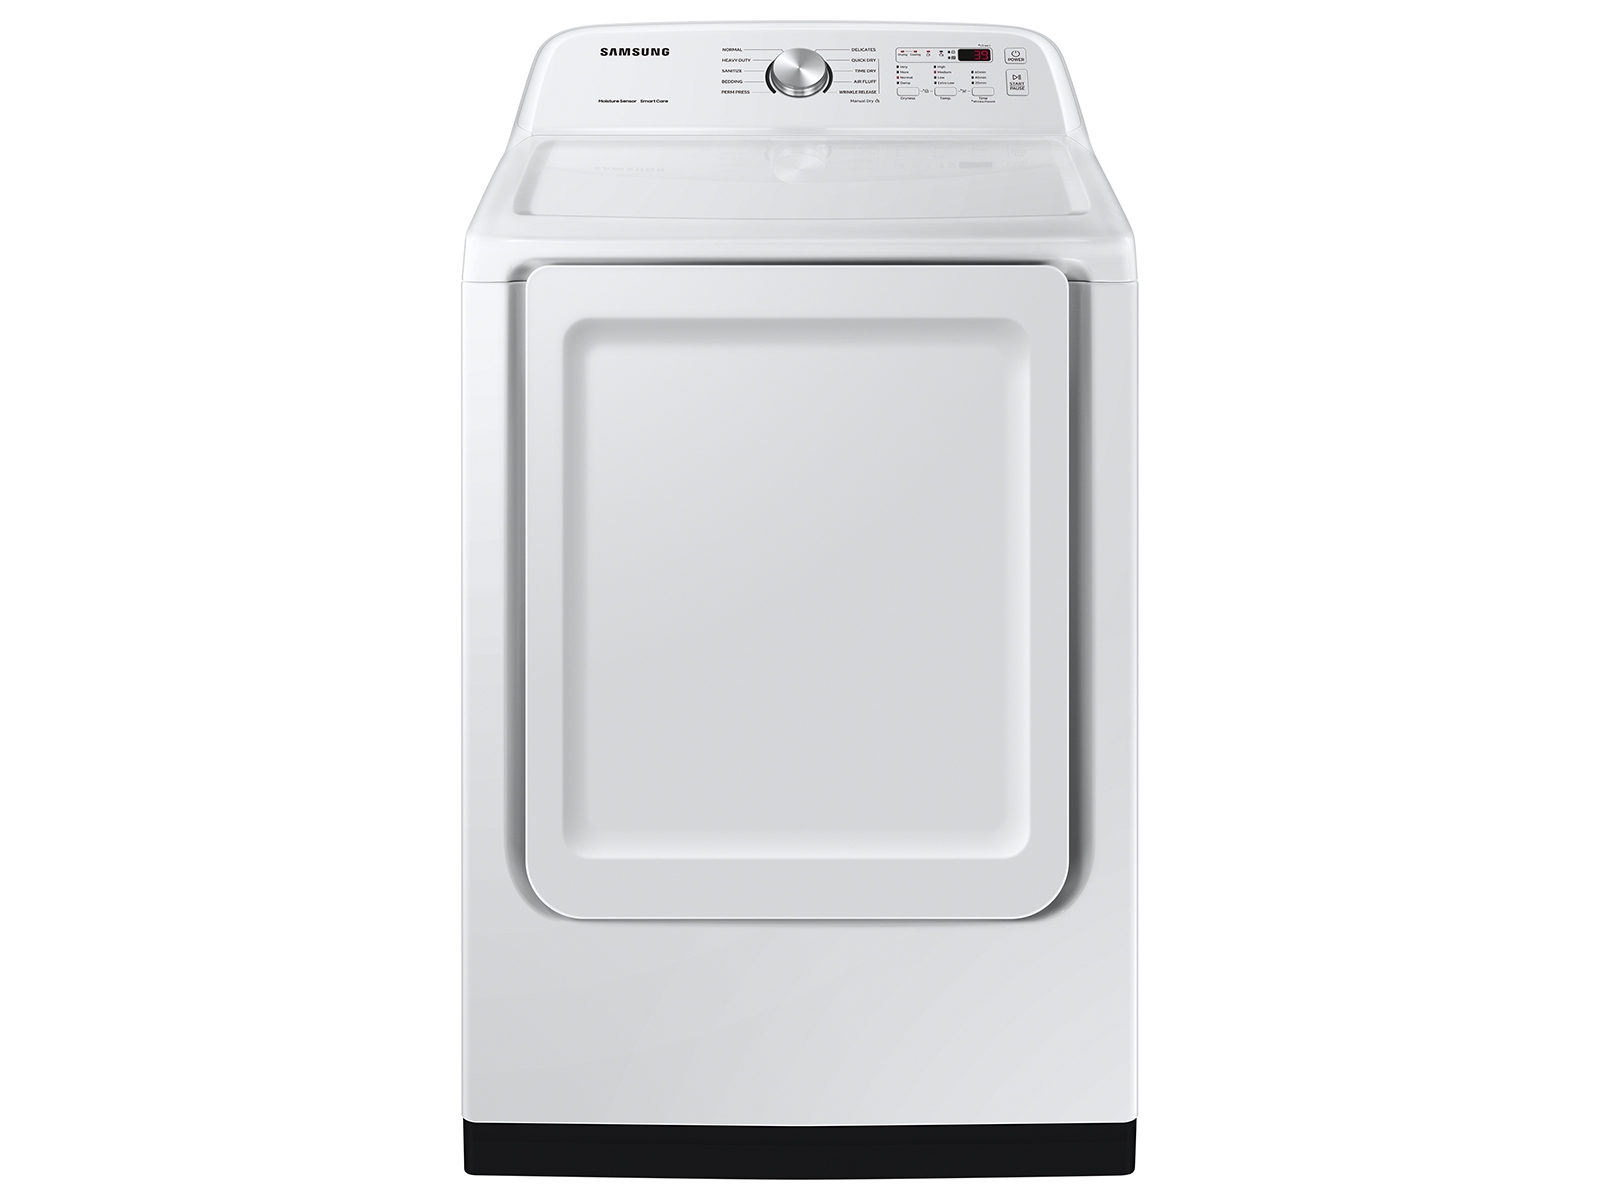 Samsung 7.4 cu. ft. Gas Dryer with Sensor Dry in White(DVG50B5100W/A3)